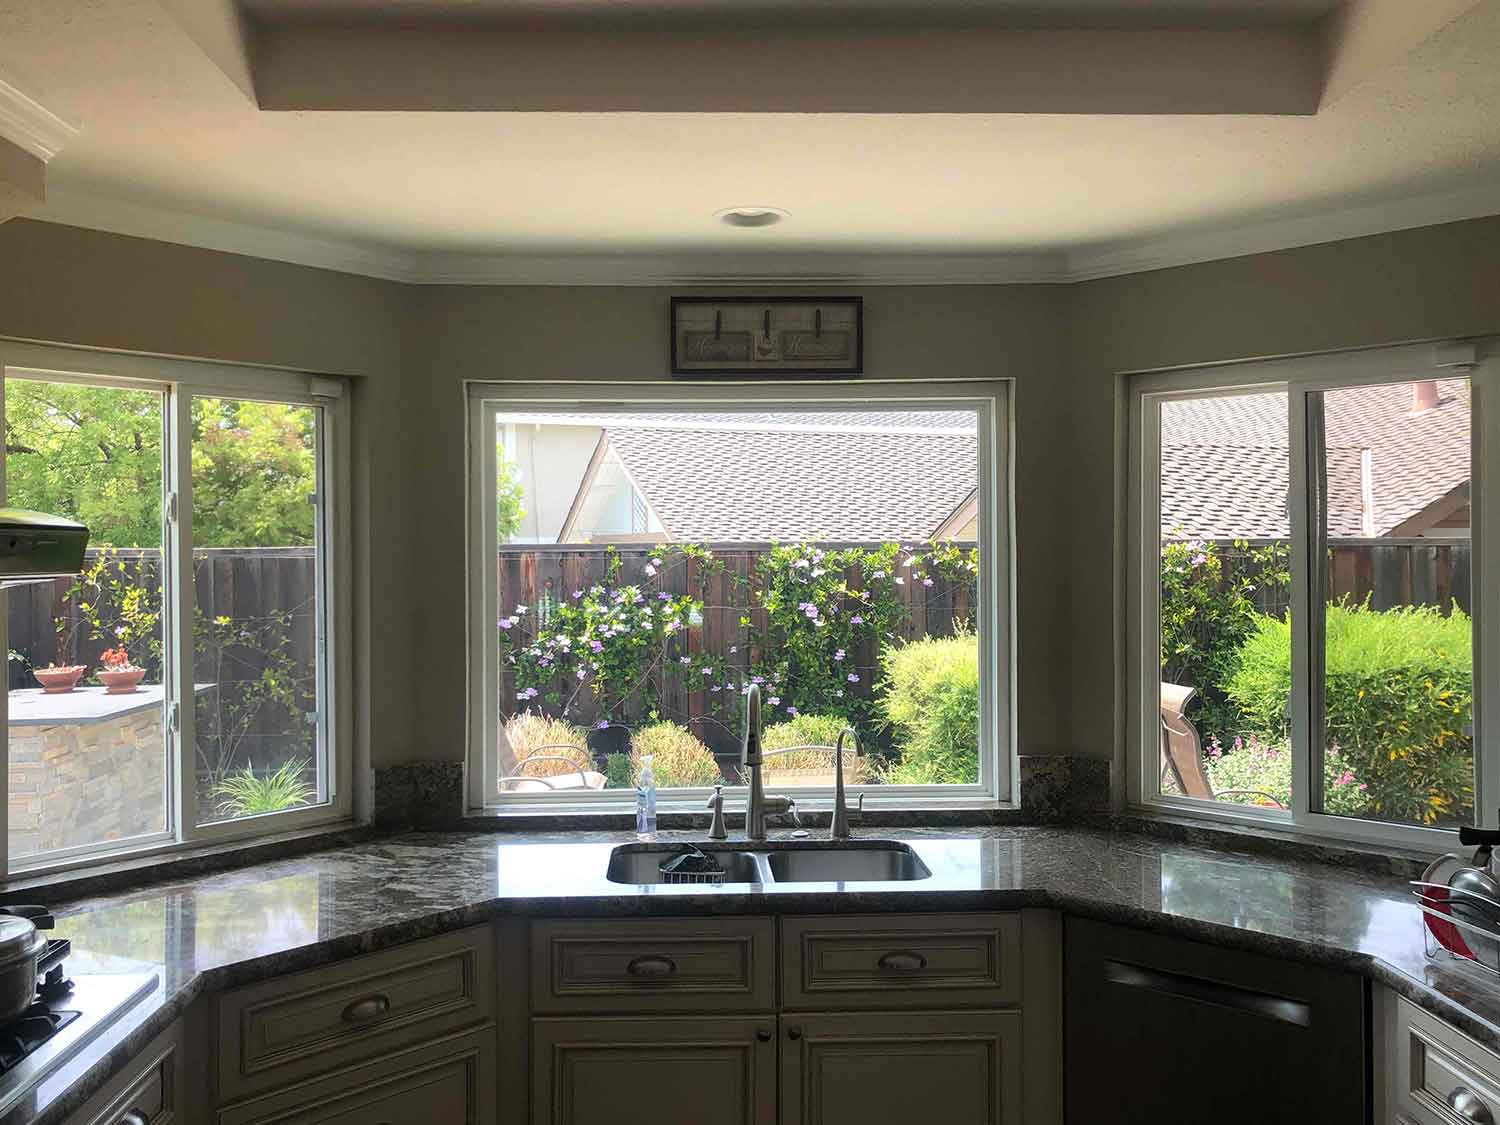 Are you looking for a home or residential window tinting installer in Danville, CA? ClimatePro offers home window tinting services for the East Bay and the surrounding areas.